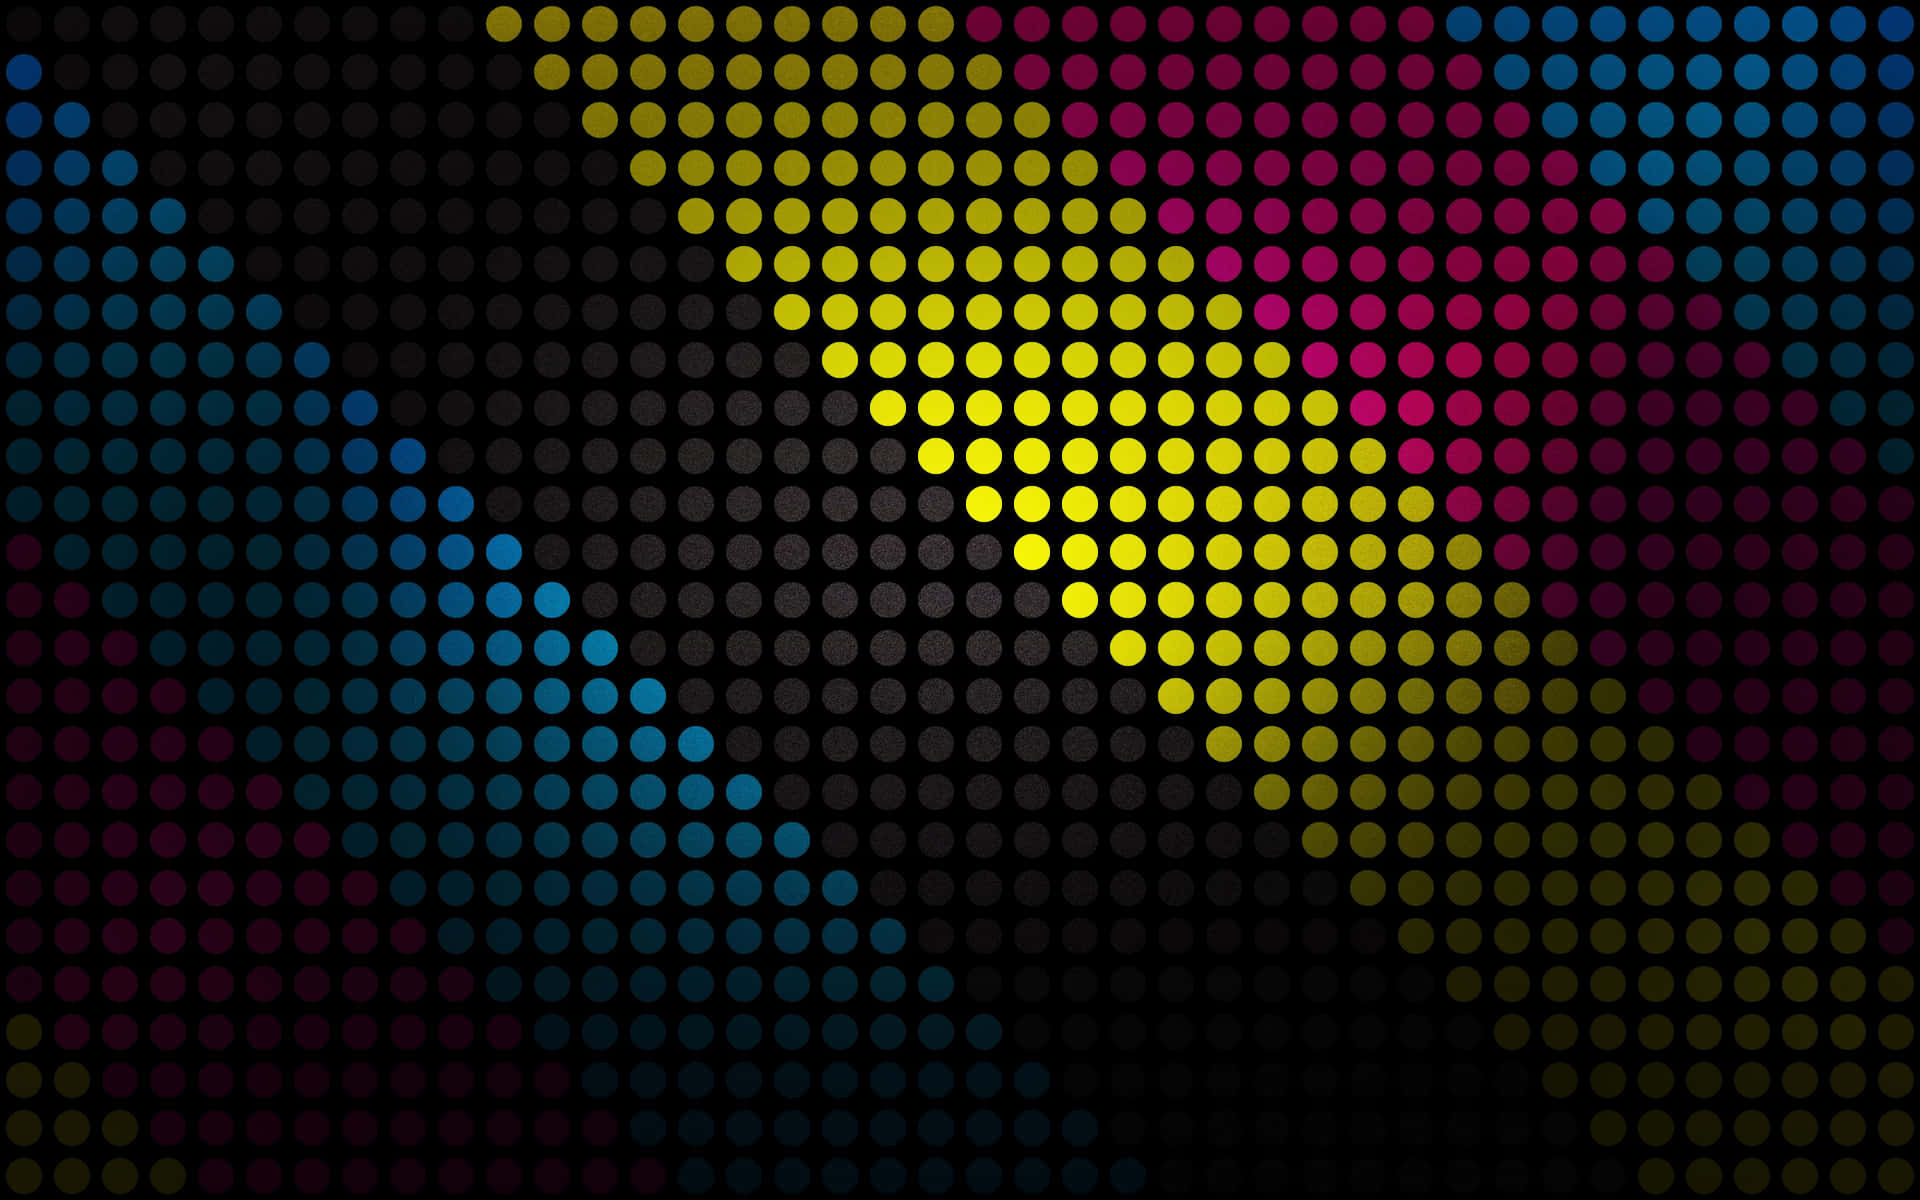 Dotted Stripes Super Amoled Display Wallpaper